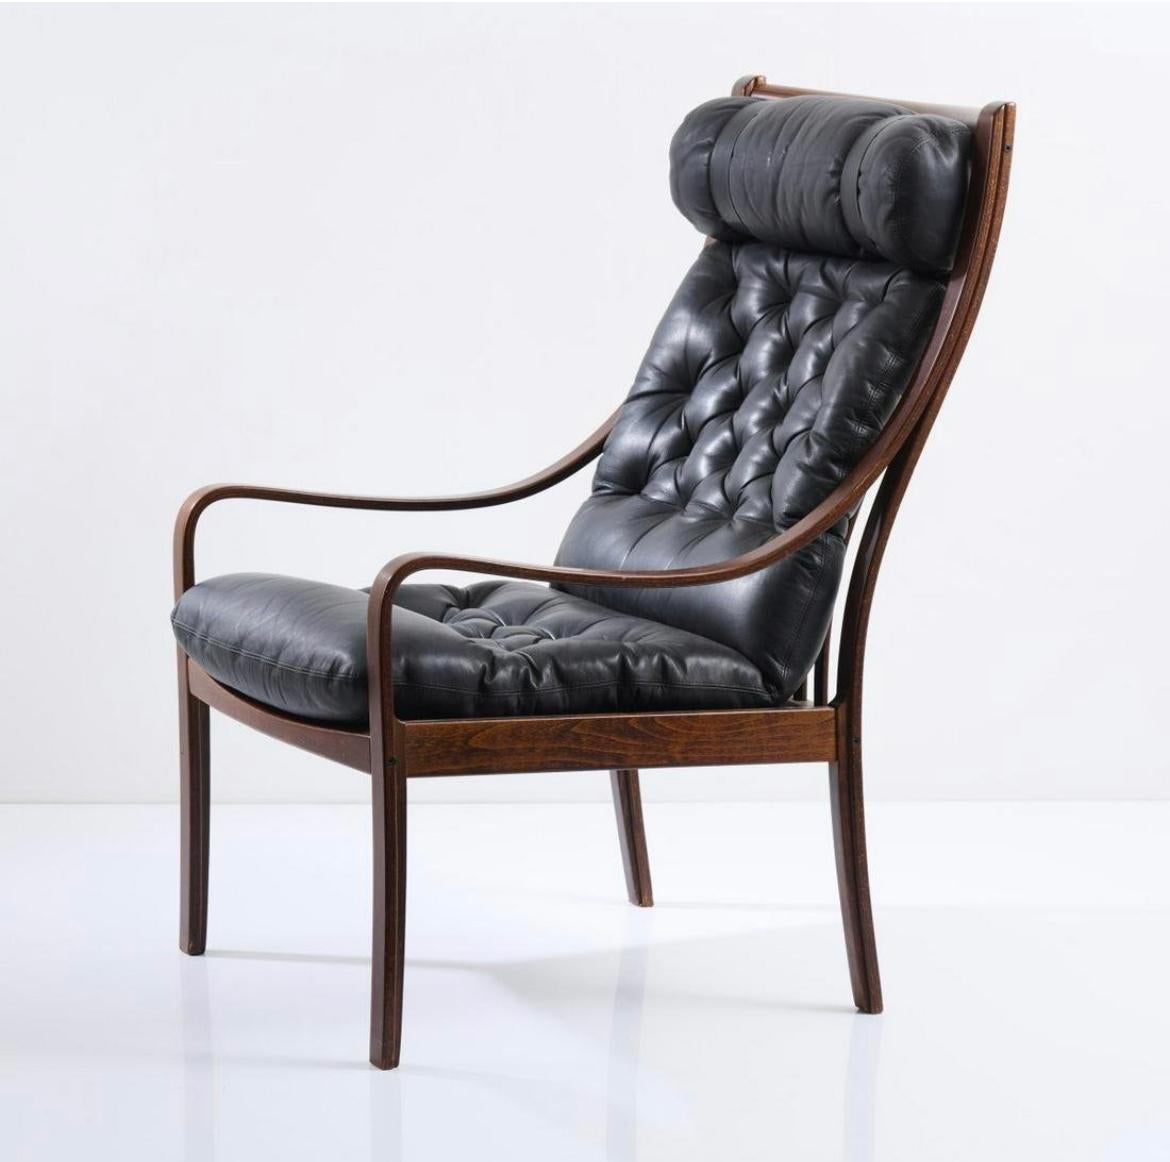 Highback Black Leather Armchair by Fredrik Kayser for Vatne, Norway, 1960s For Sale 3